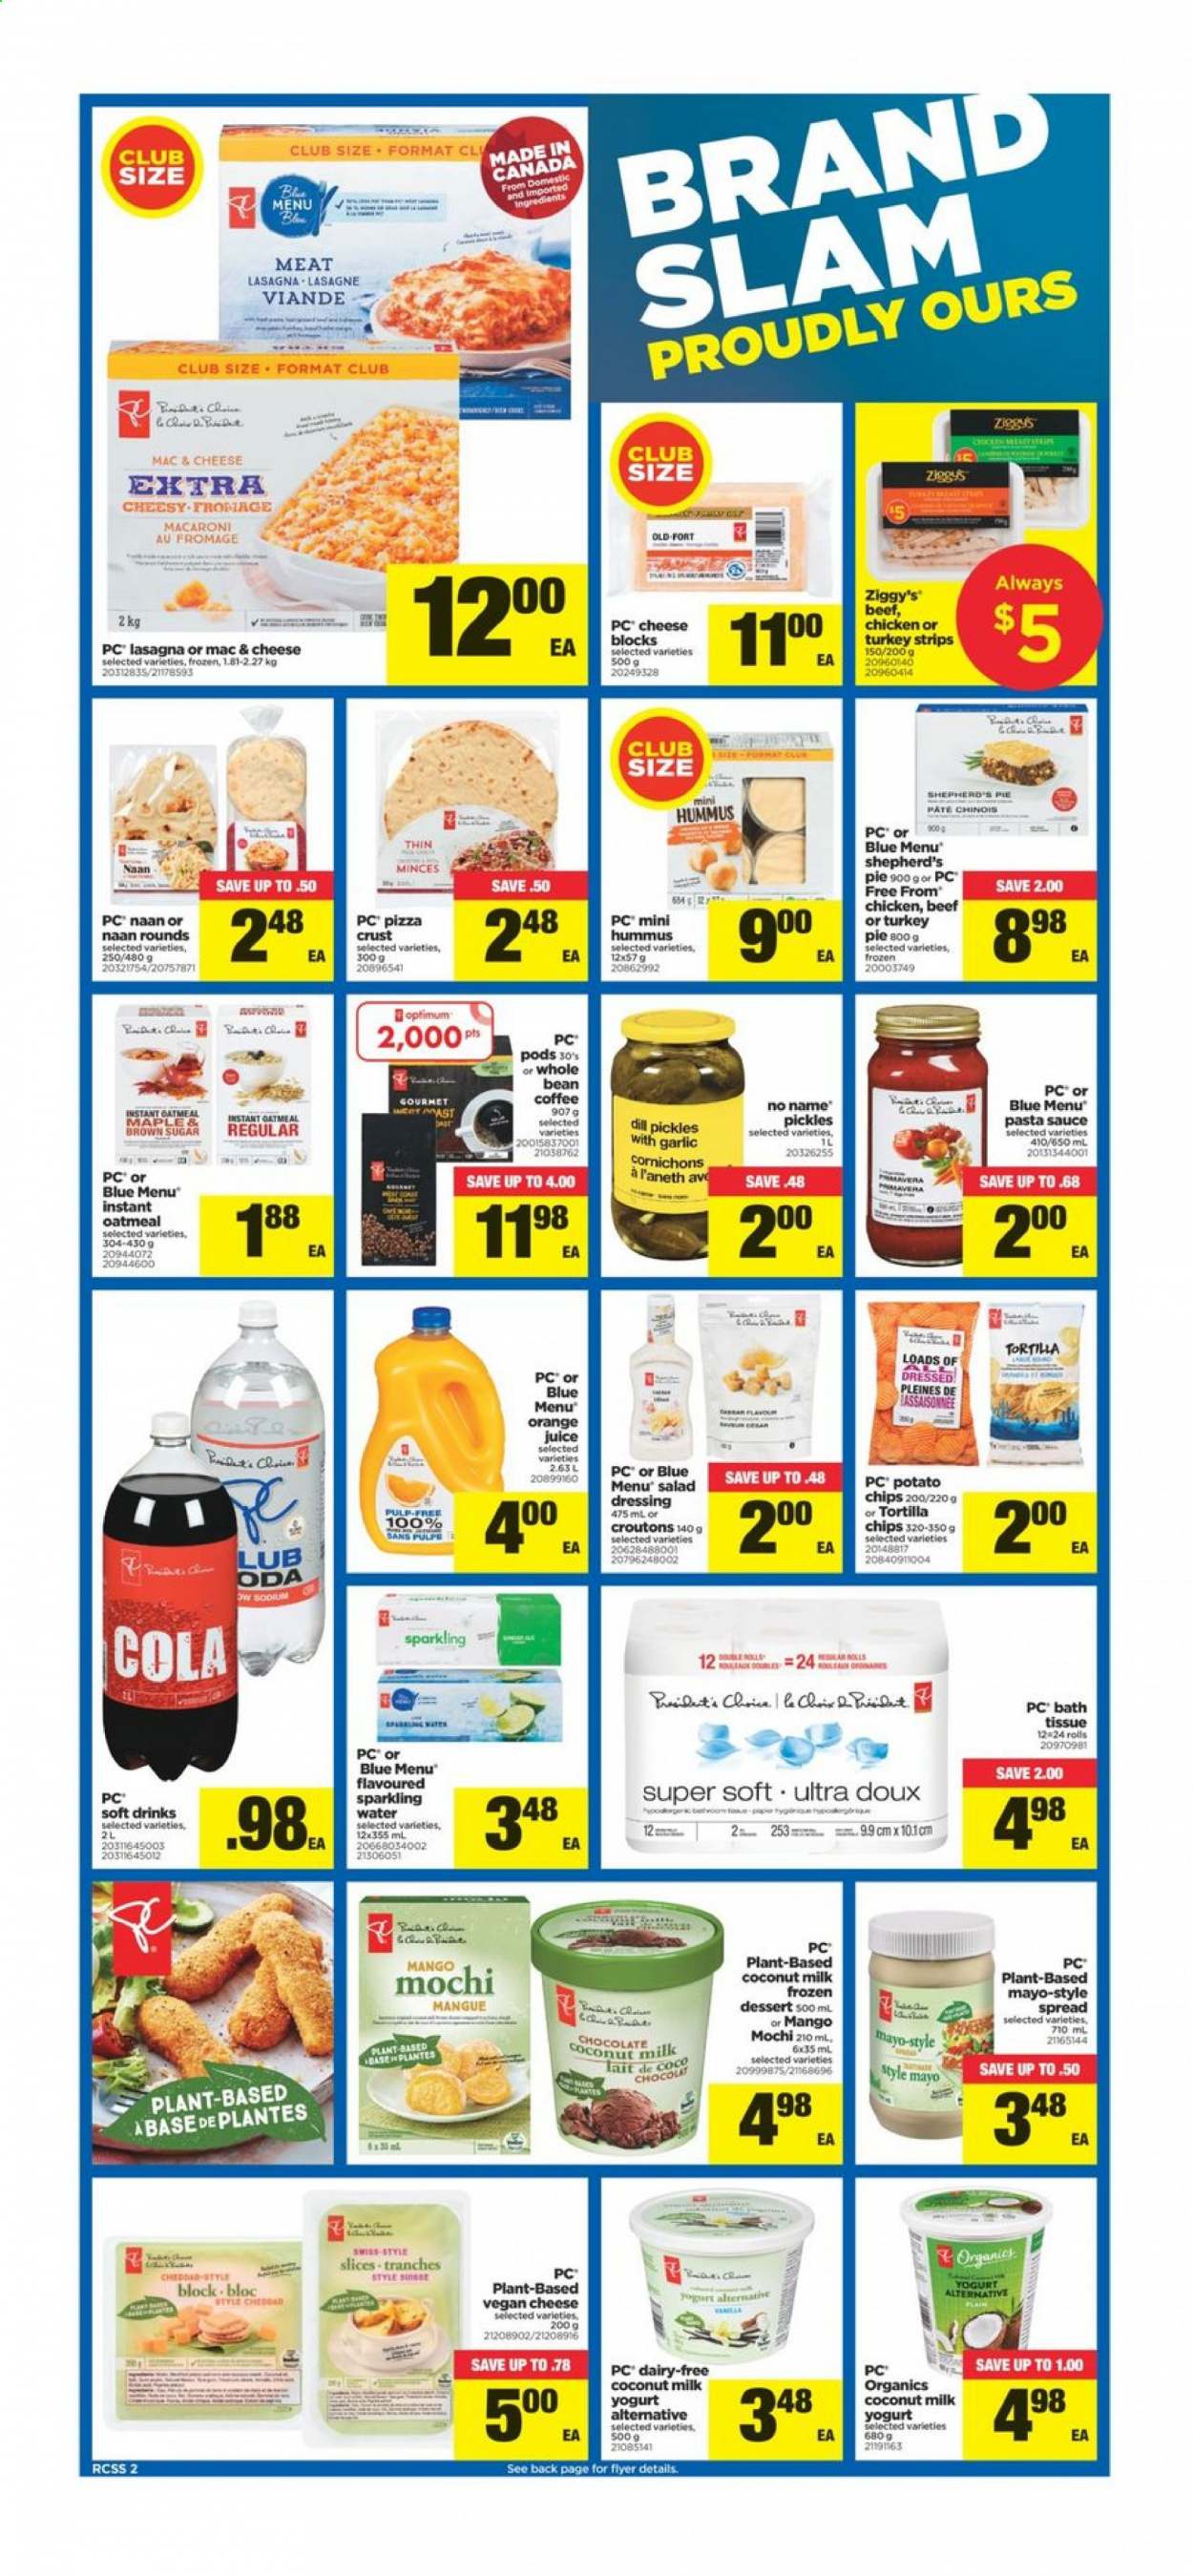 thumbnail - Real Canadian Superstore Flyer - January 14, 2021 - January 20, 2021 - Sales products - No Name, pizza, pasta sauce, macaroni, lasagna meal, hummus, yoghurt, mayonnaise, chocolate, tortilla chips, potato chips, croutons, oatmeal, coconut milk, pickles, dill, salad dressing, dressing, orange juice, juice, soft drink, sparkling water, coffee, bath tissue, Optimum. Page 2.